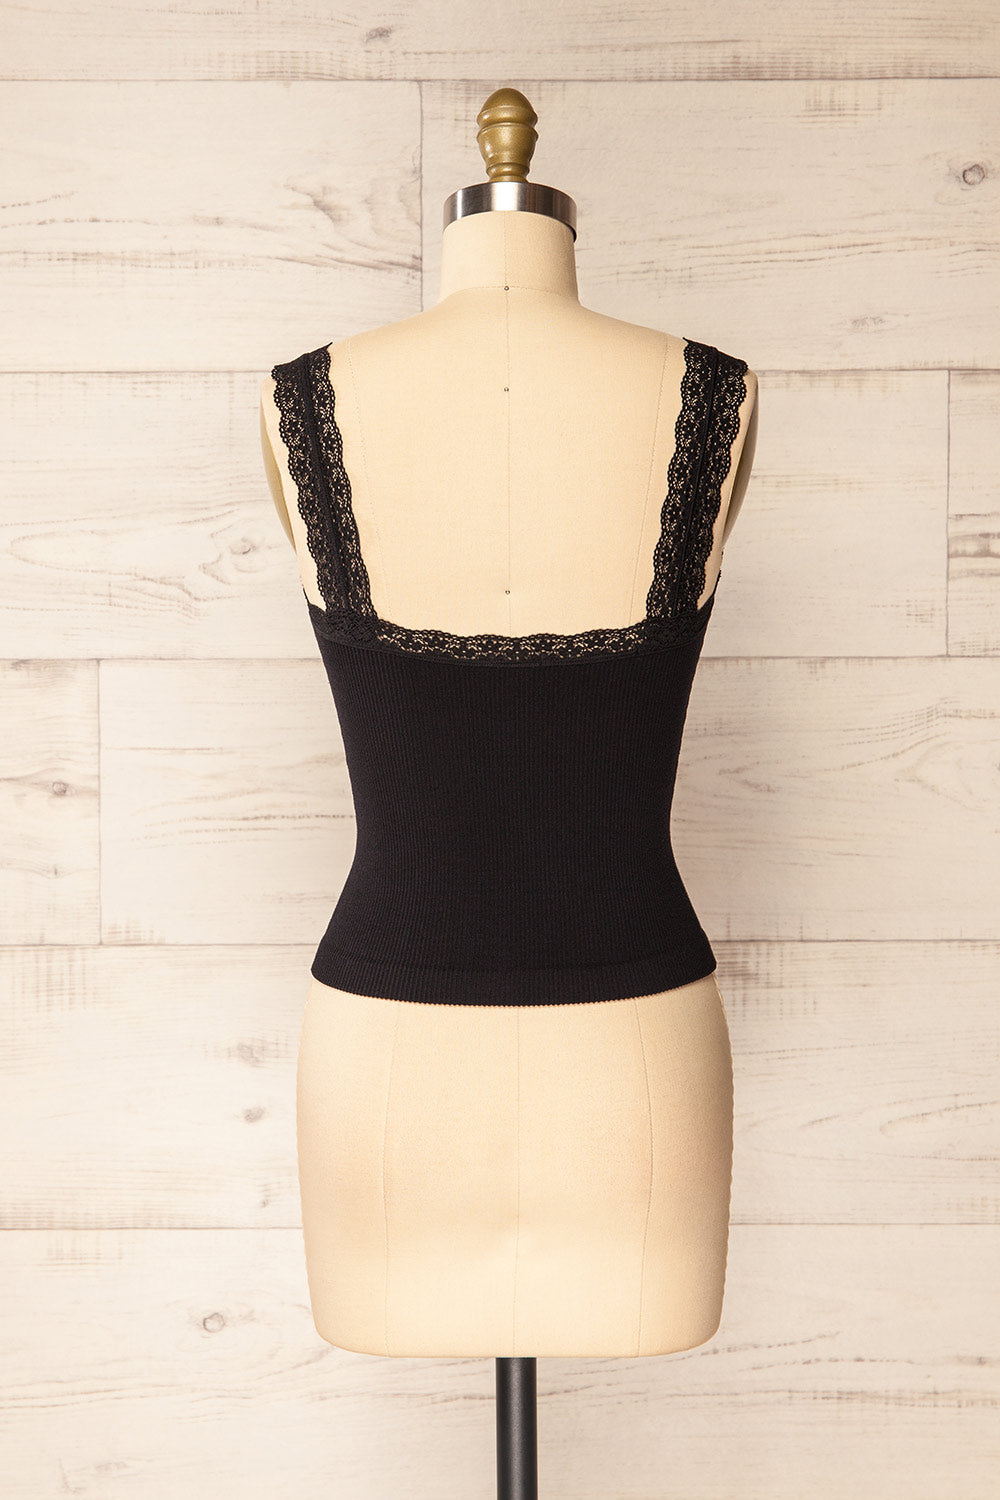 Somensac Black Ribbed Camisole w/ Lace Trim | Boutique 1861 back view